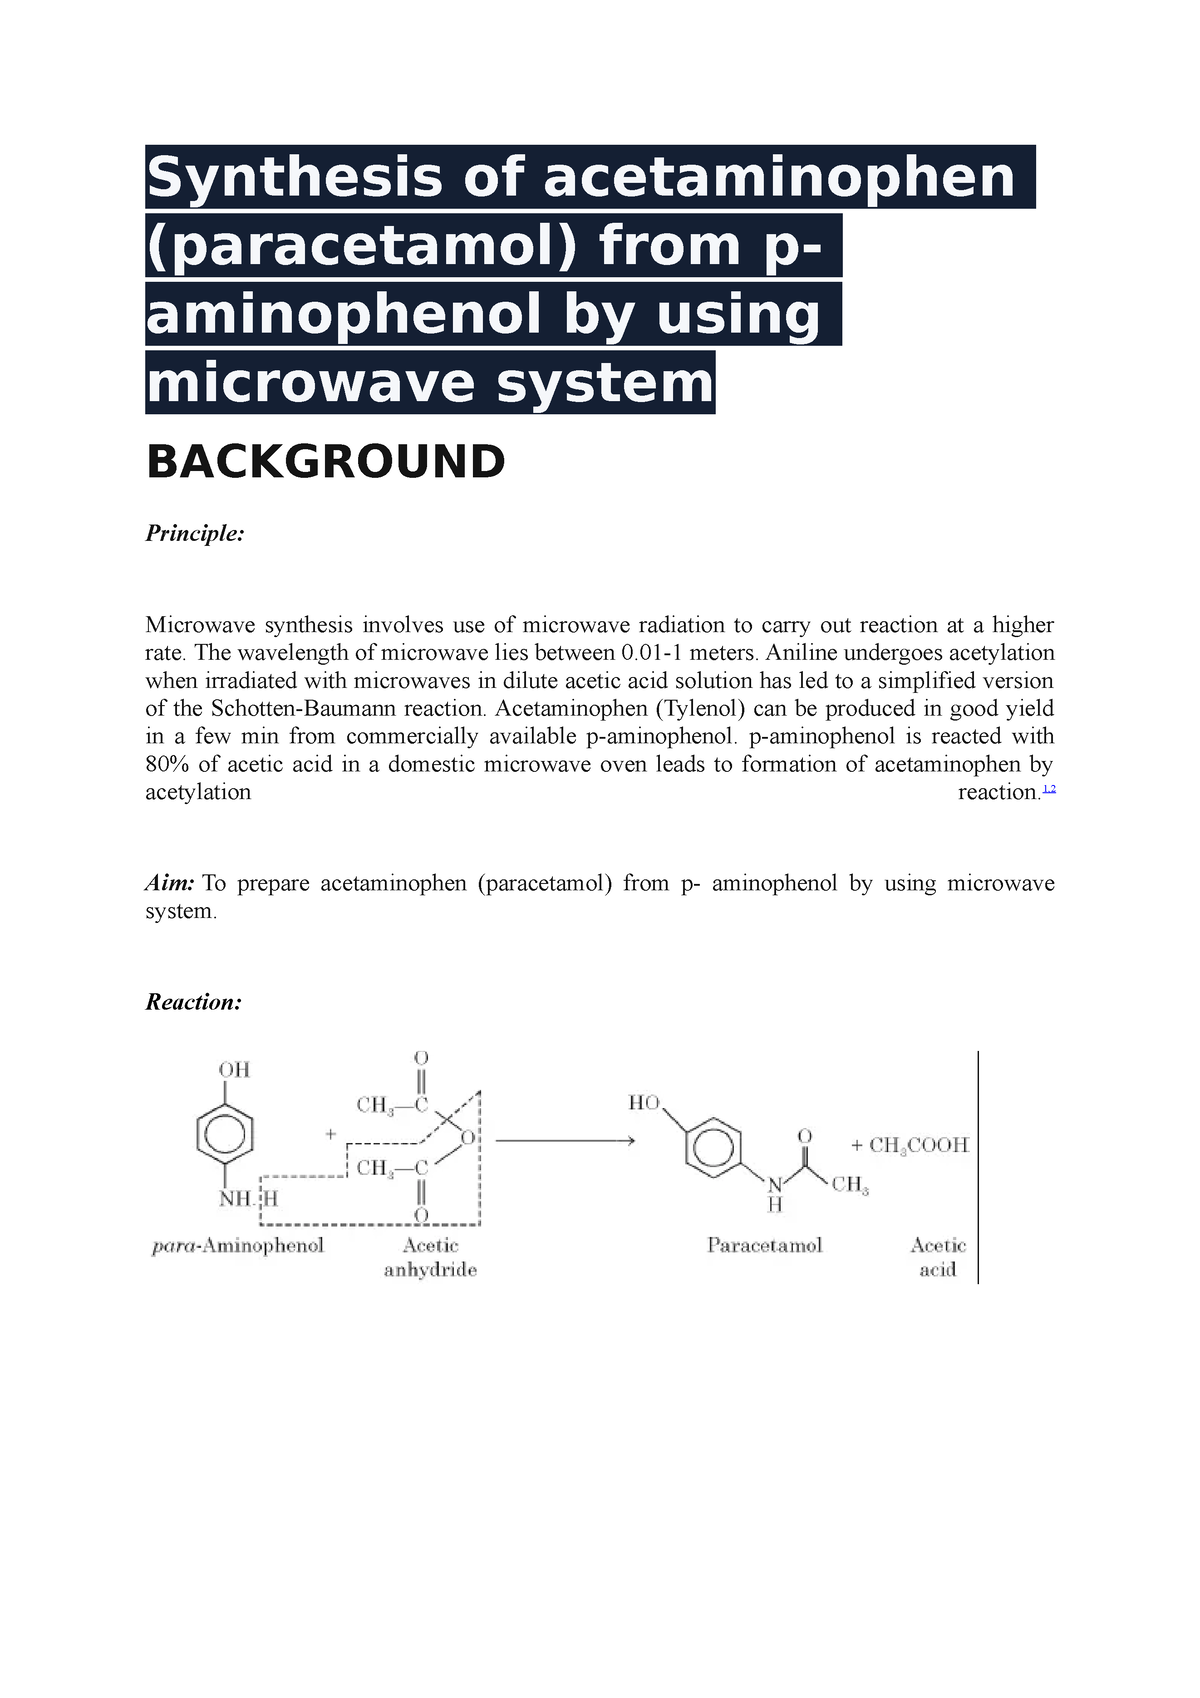 Synthesis of acetaminophen - Synthesis of acetaminophen (paracetamol ...